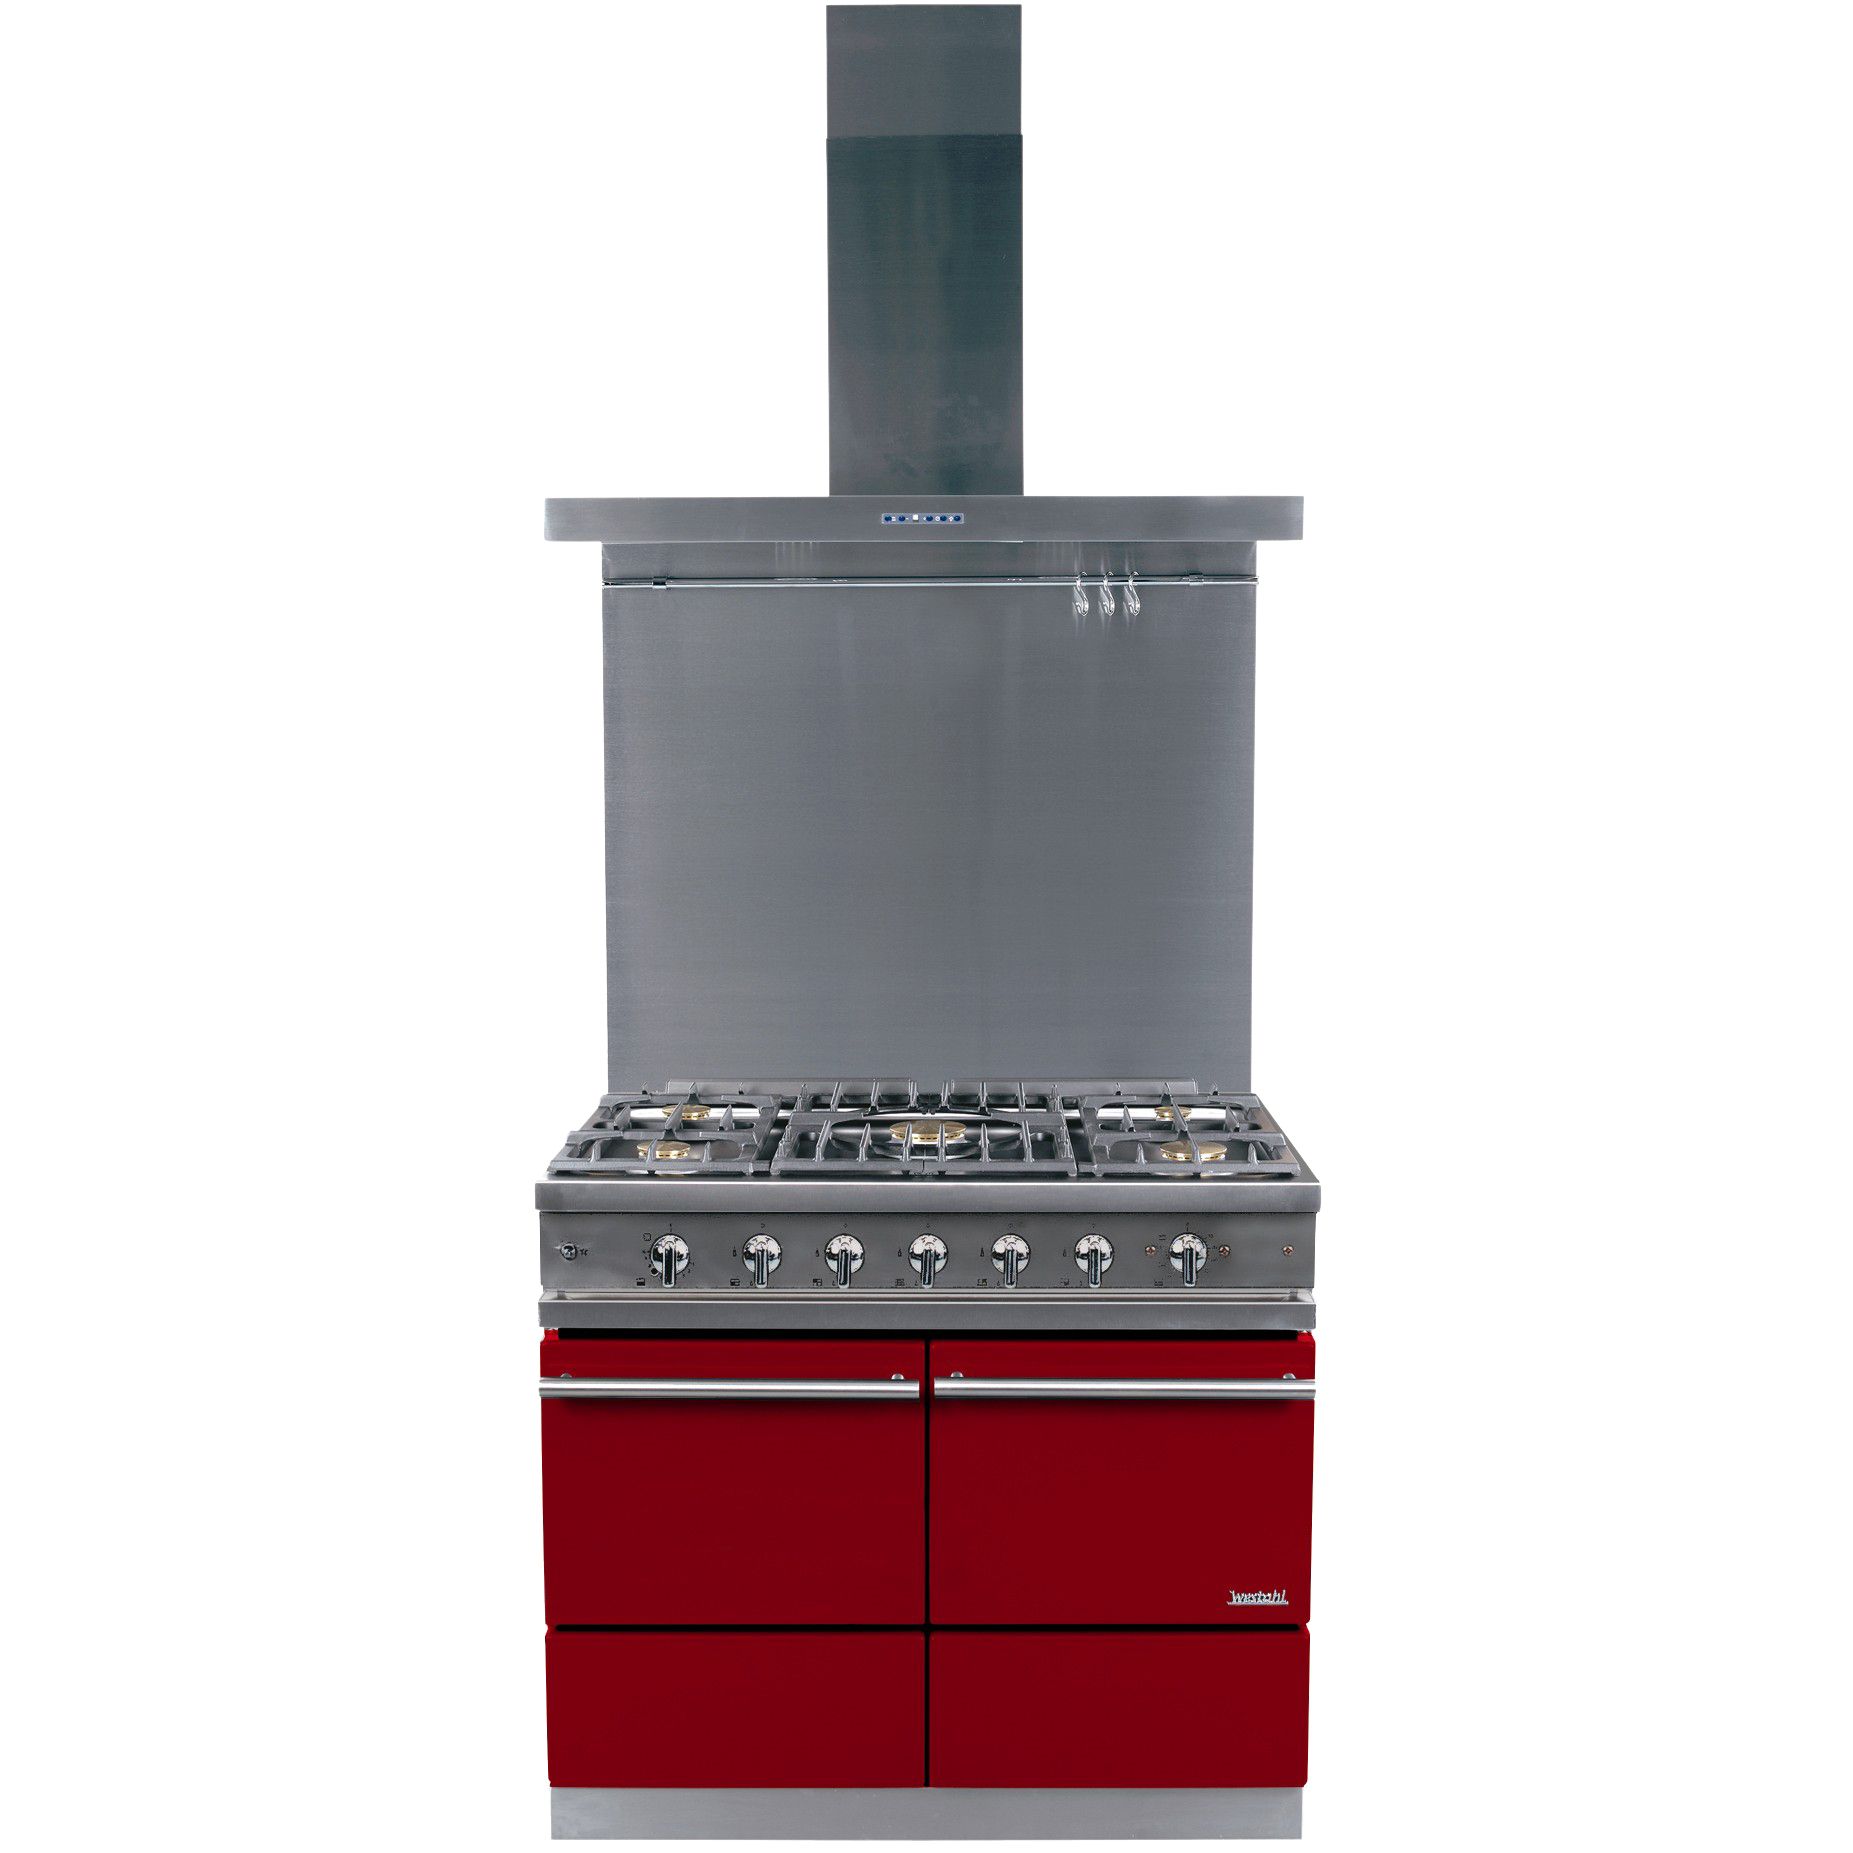 Westahl Cluny WG1052GEPK1 Dual Fuel Cooker, Hood and Splashback Package, Chinese Red at John Lewis